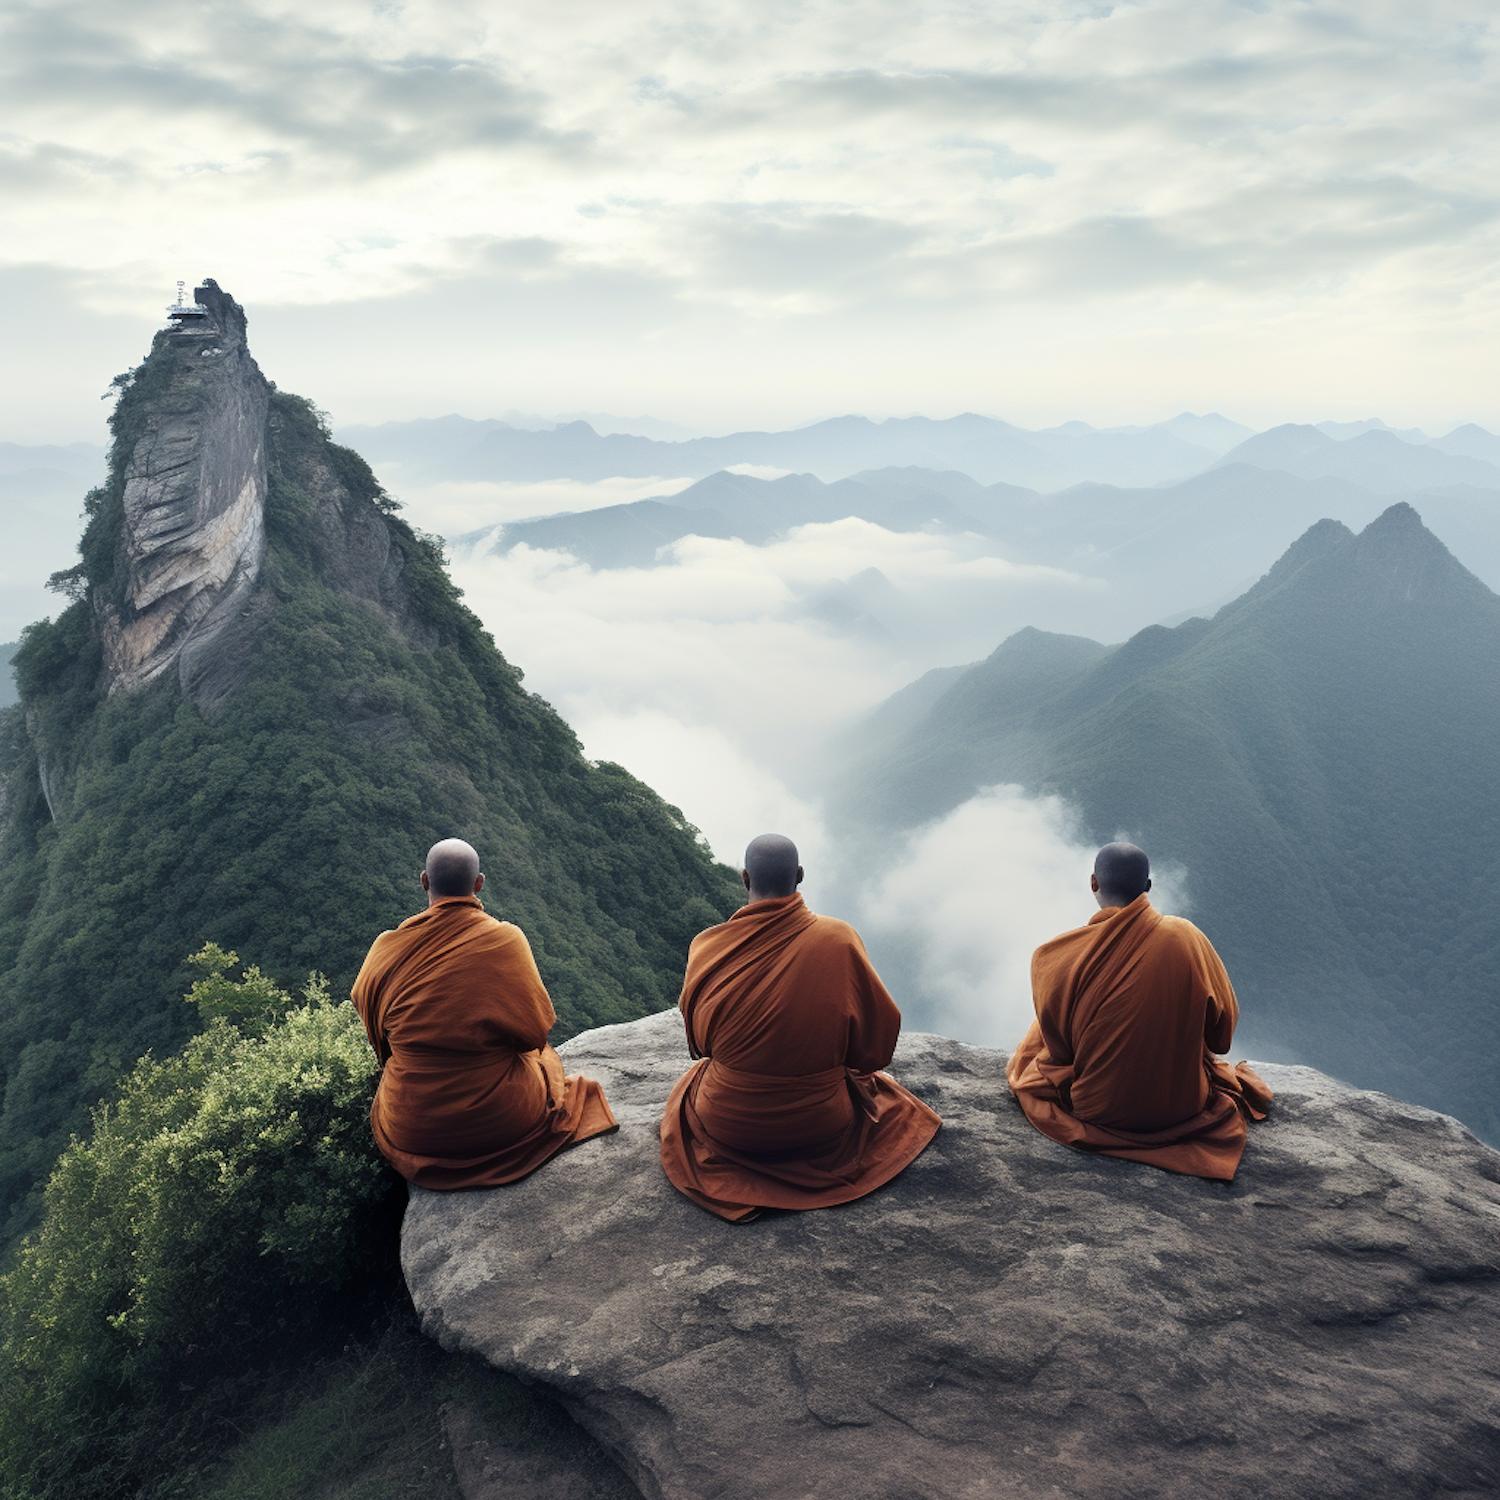 Serenity Amidst the Clouds: Monastic Meditation on a Mountain Vista